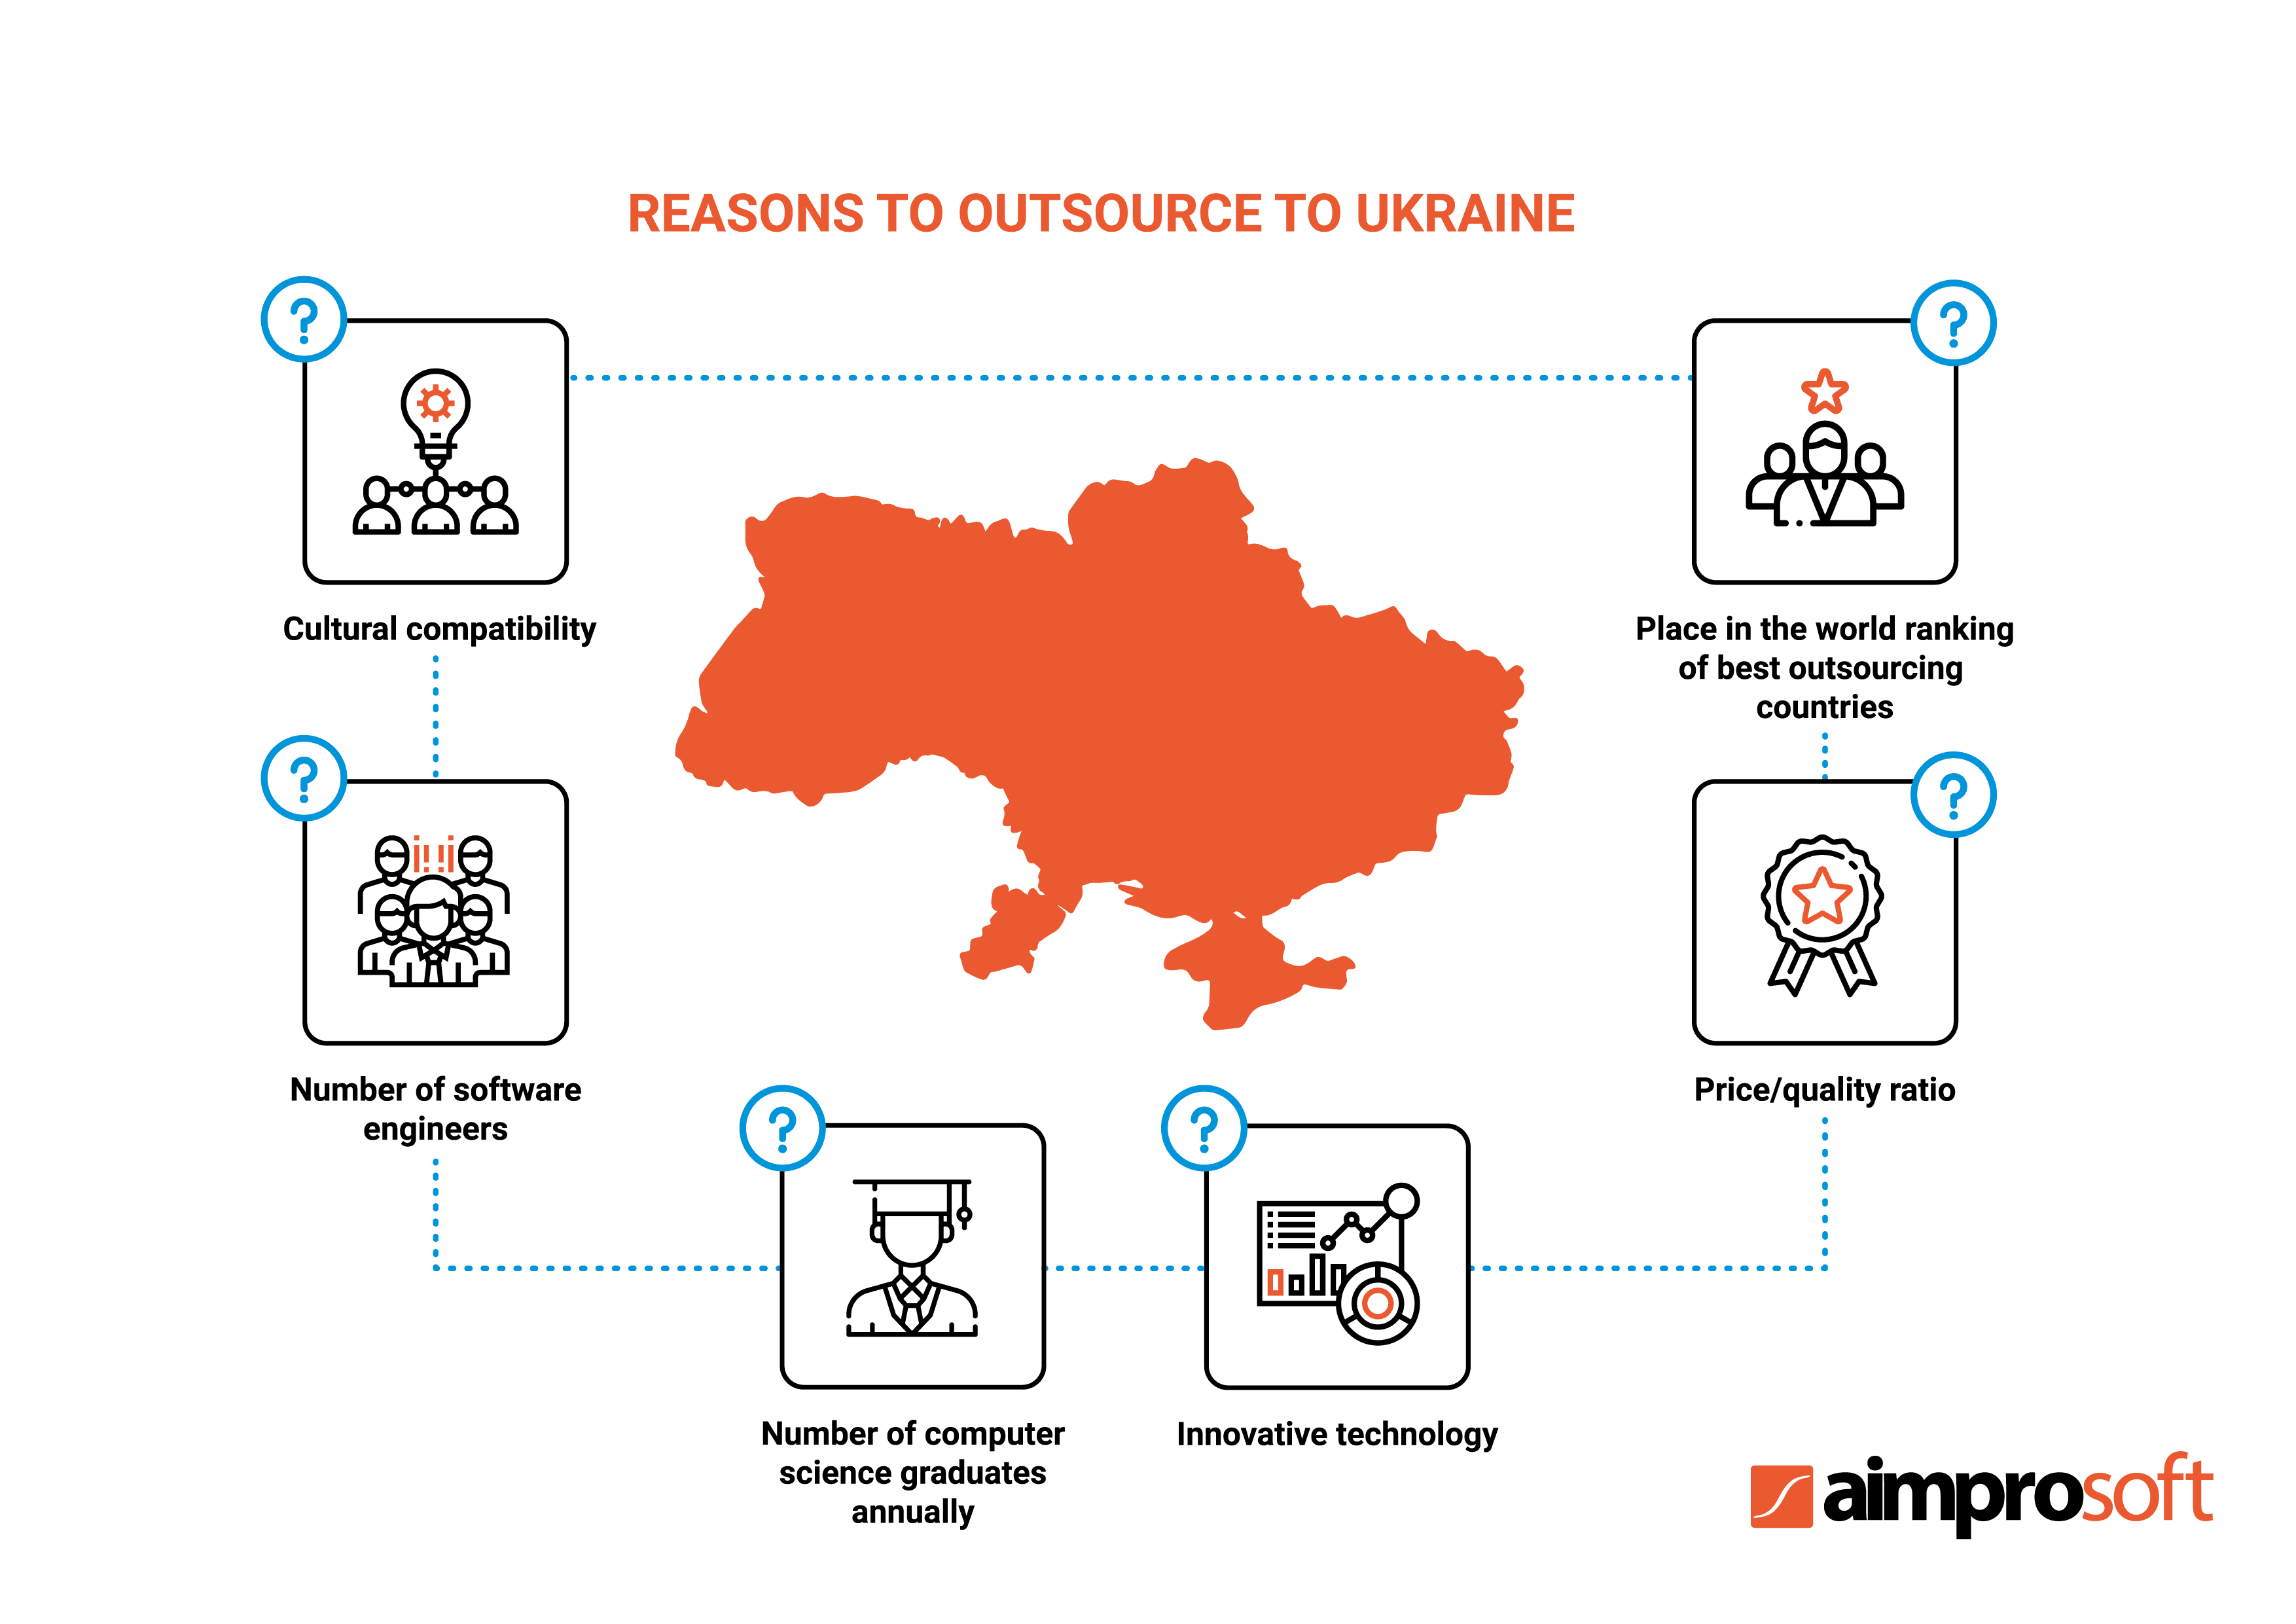 IT outsourcing to Ukraine